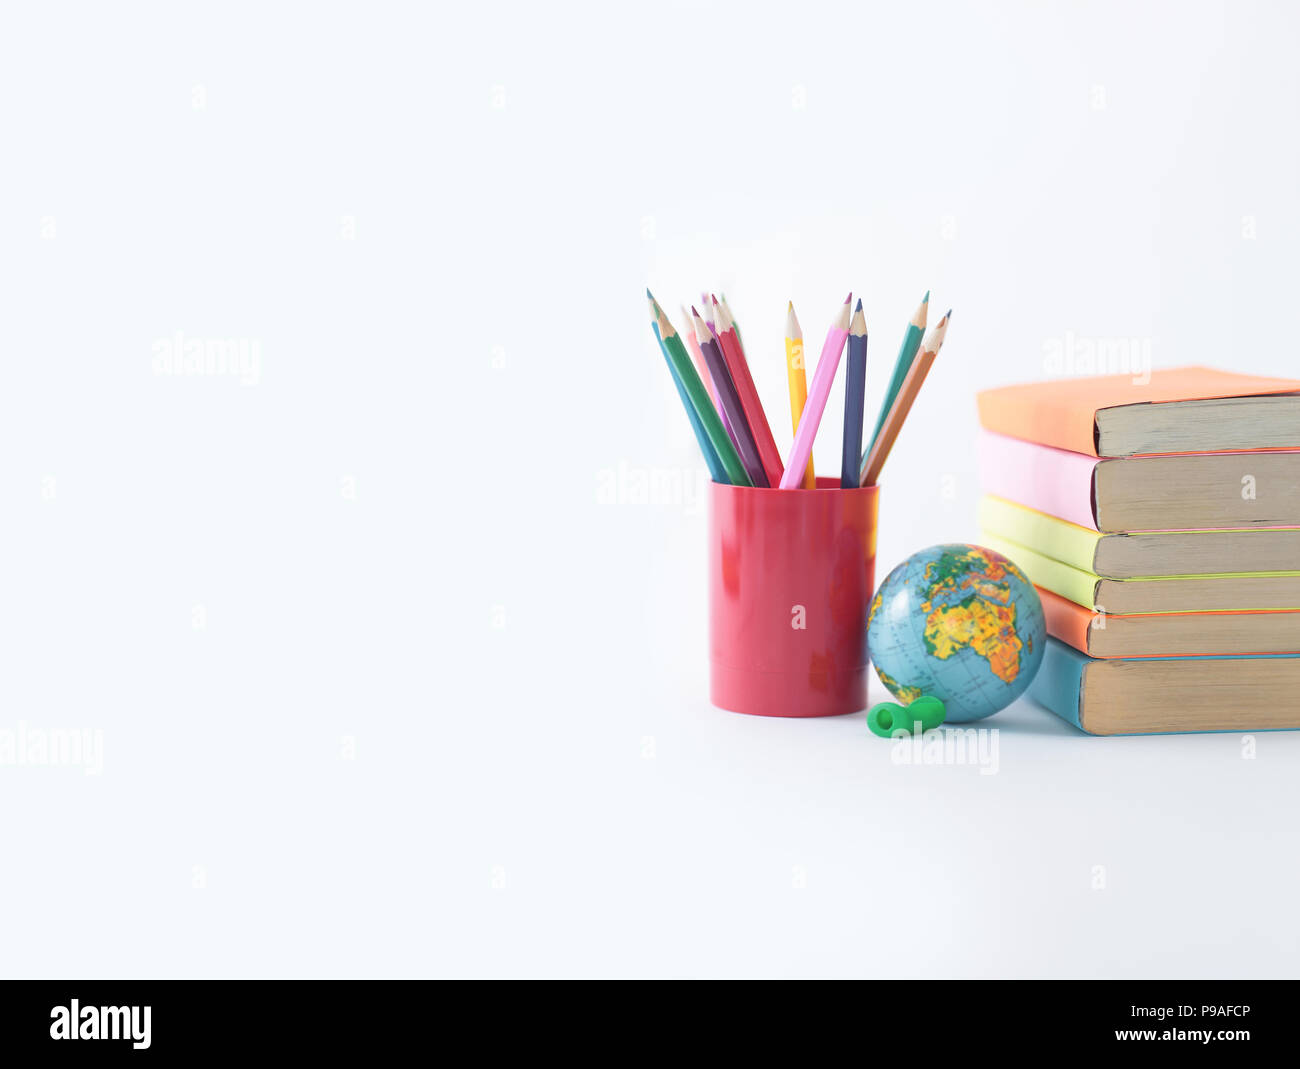 https://c8.alamy.com/comp/P9AFCP/globe-books-and-pencils-on-white-background-photo-with-copy-space-P9AFCP.jpg